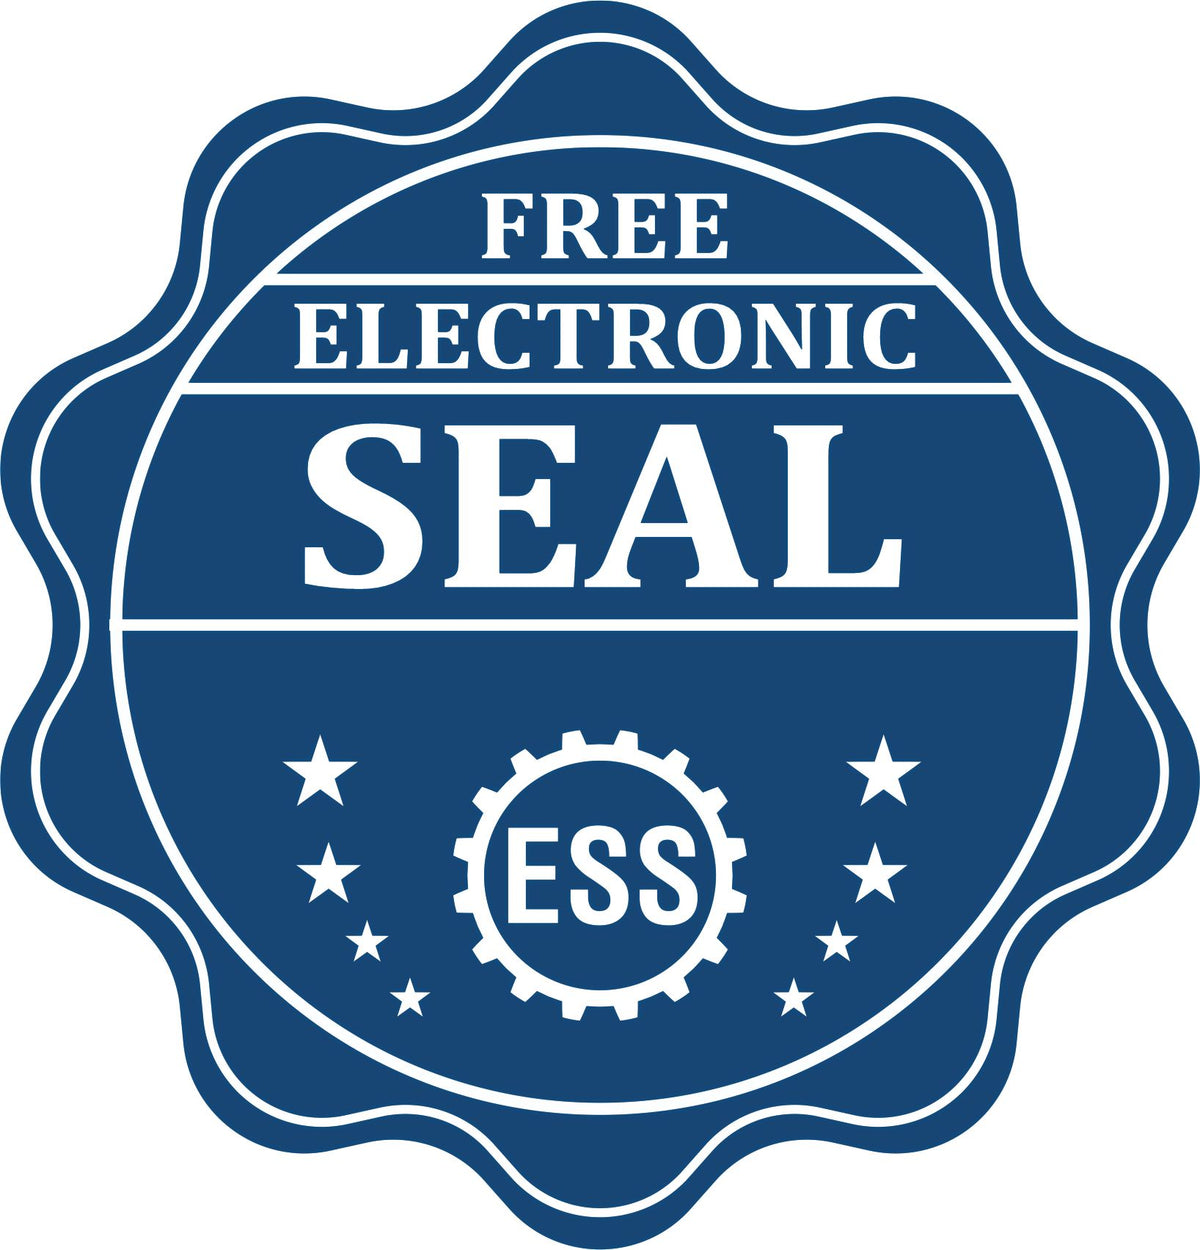 A badge showing a free electronic seal for the PSI Kansas Notary Stamp with stars and the ESS gear on the emblem.